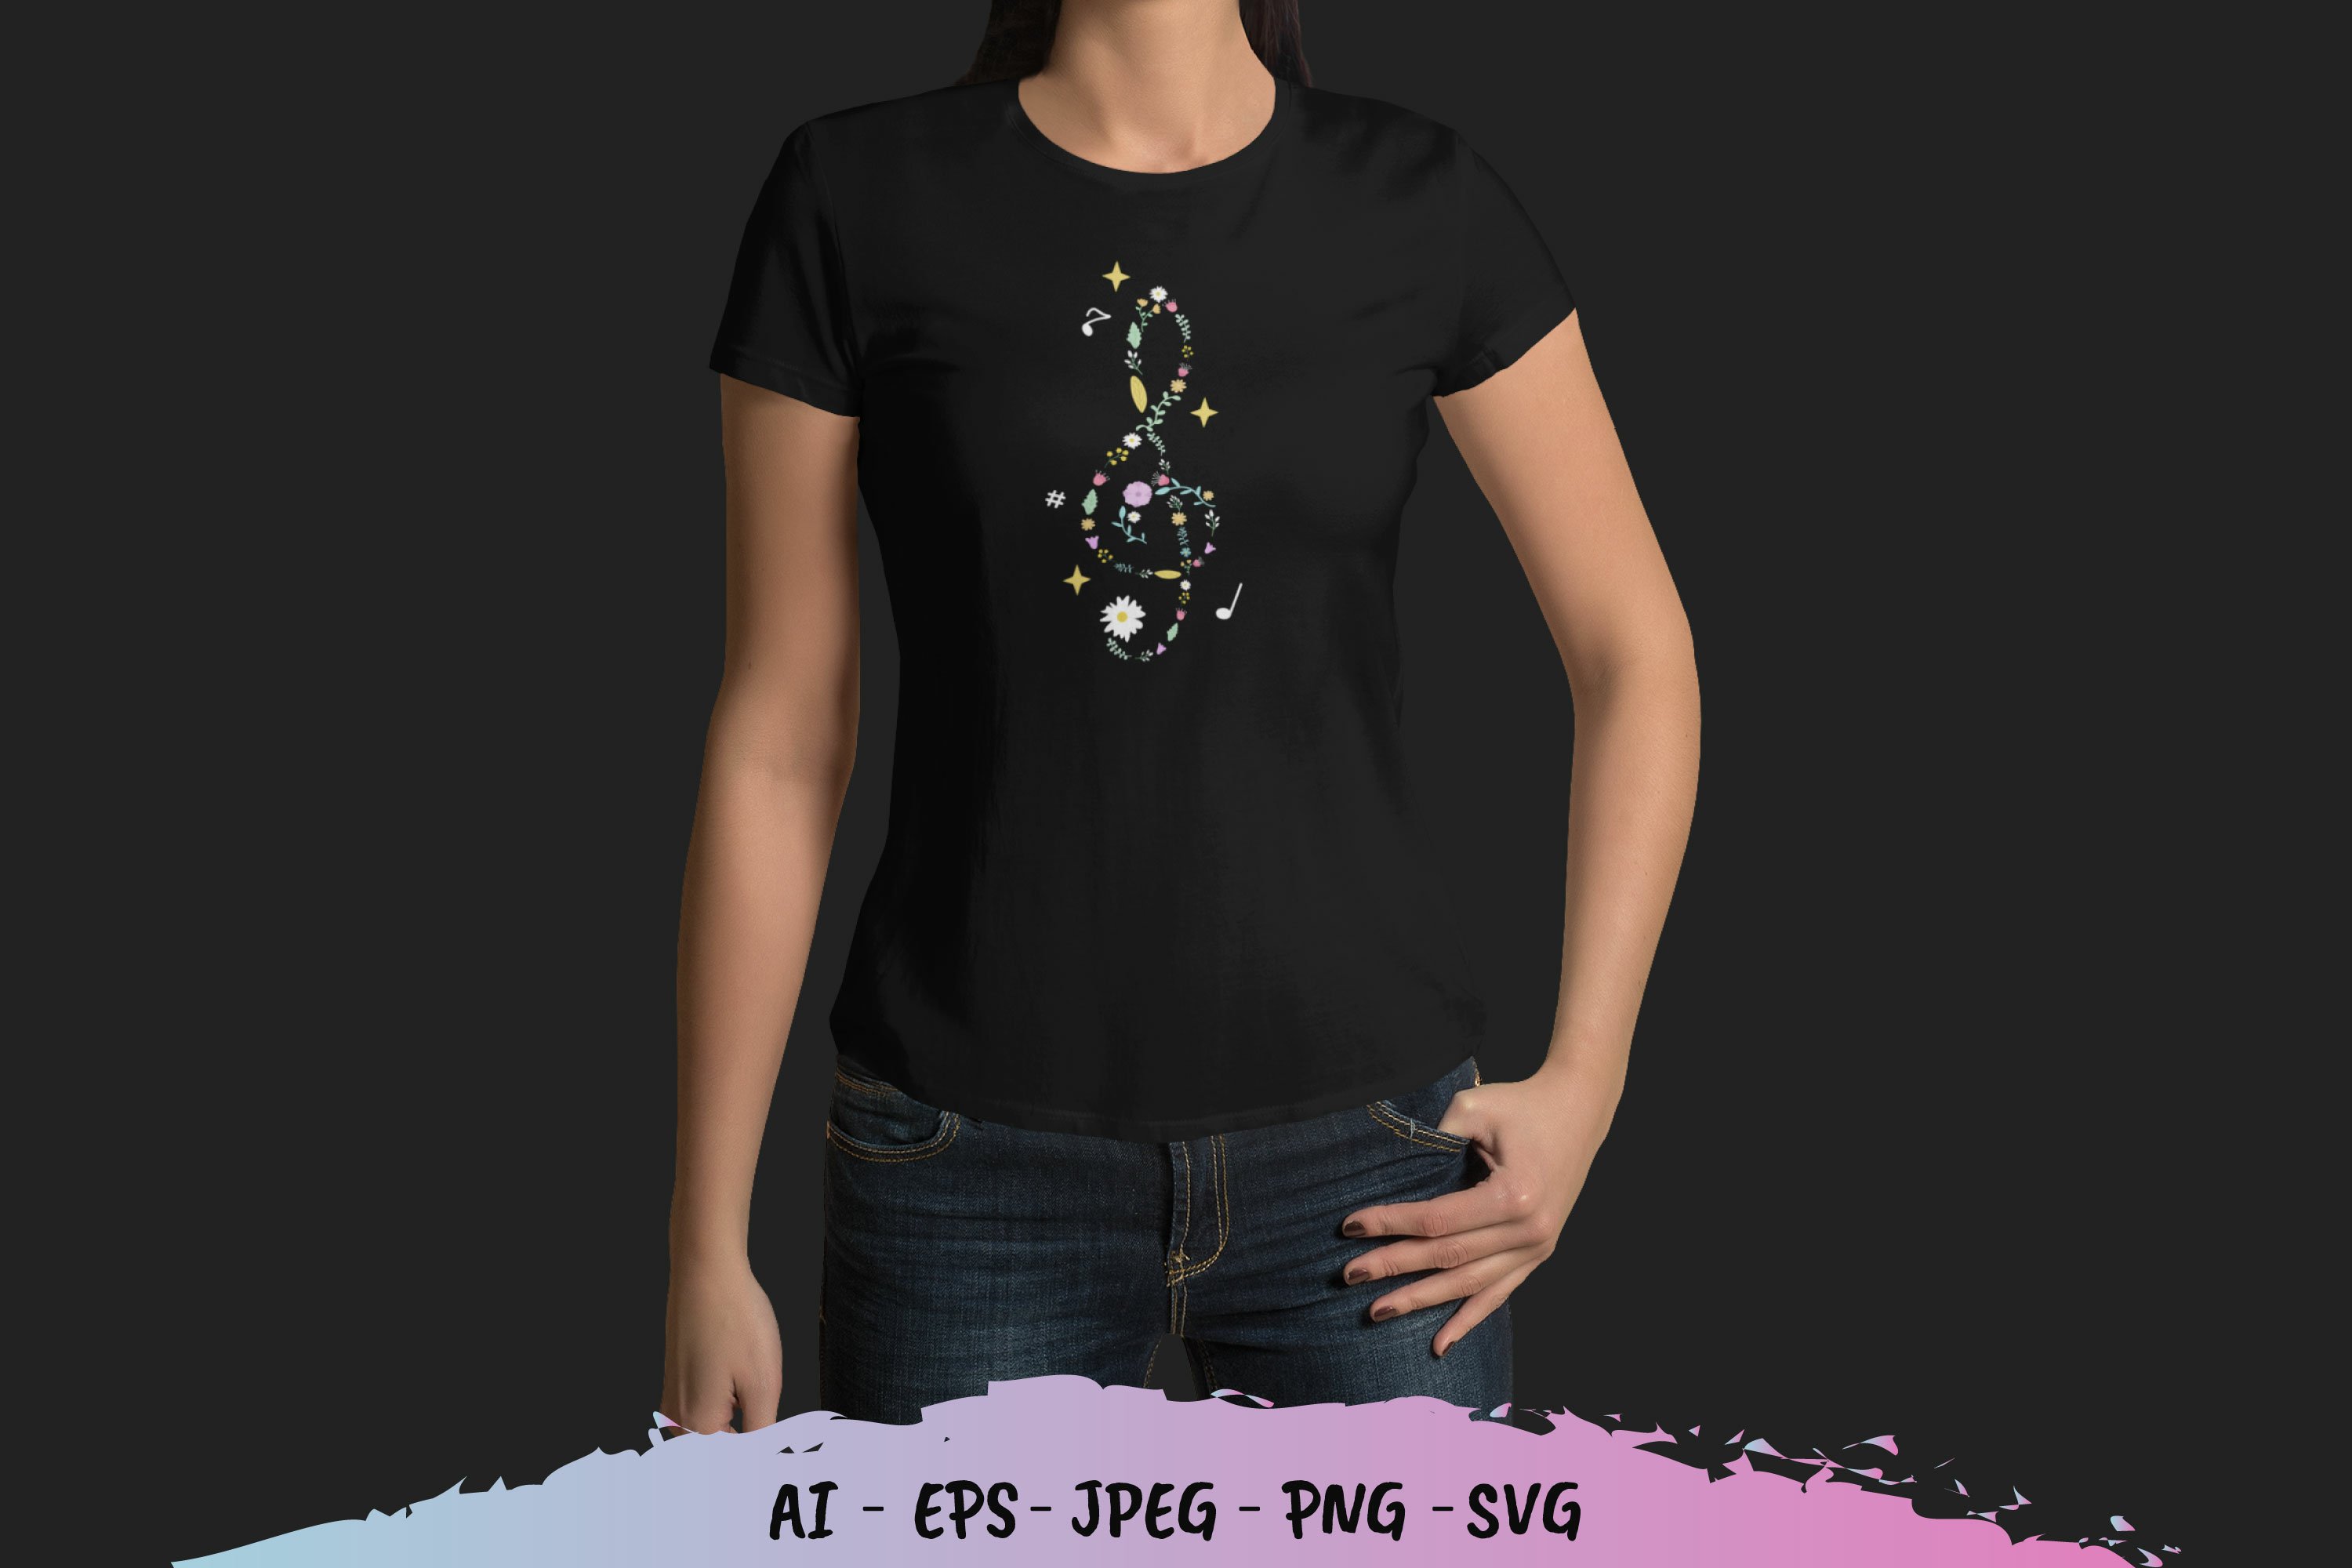 Black t-shirt with bright music note.